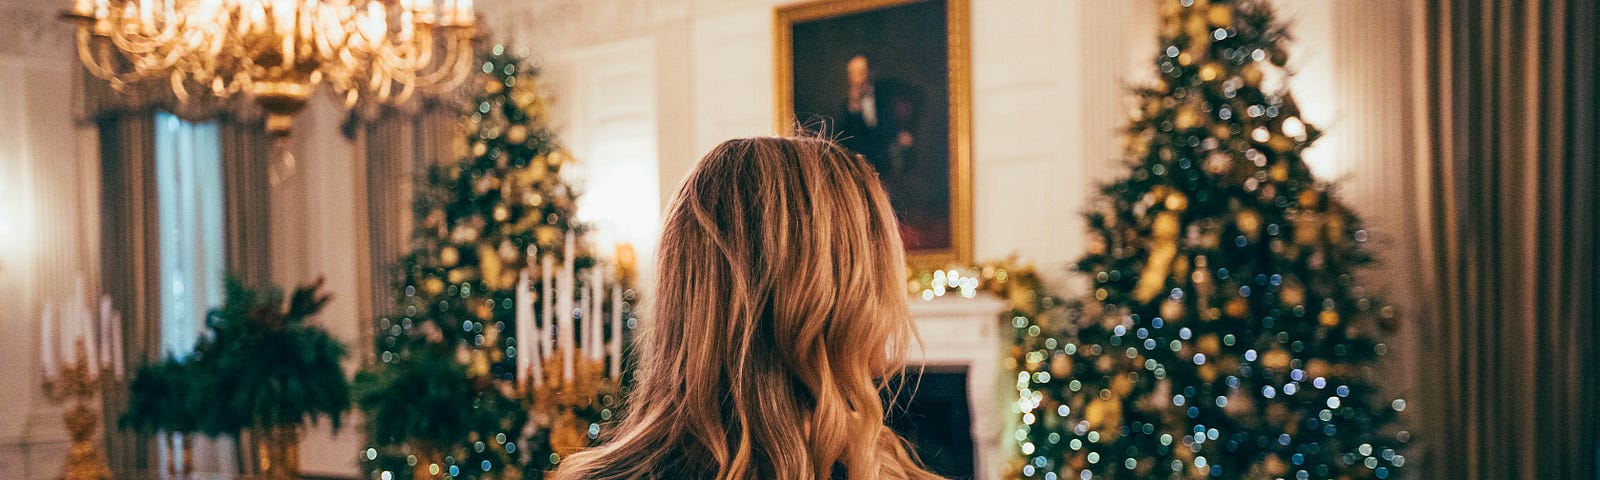 A lady looking at two Christmas trees